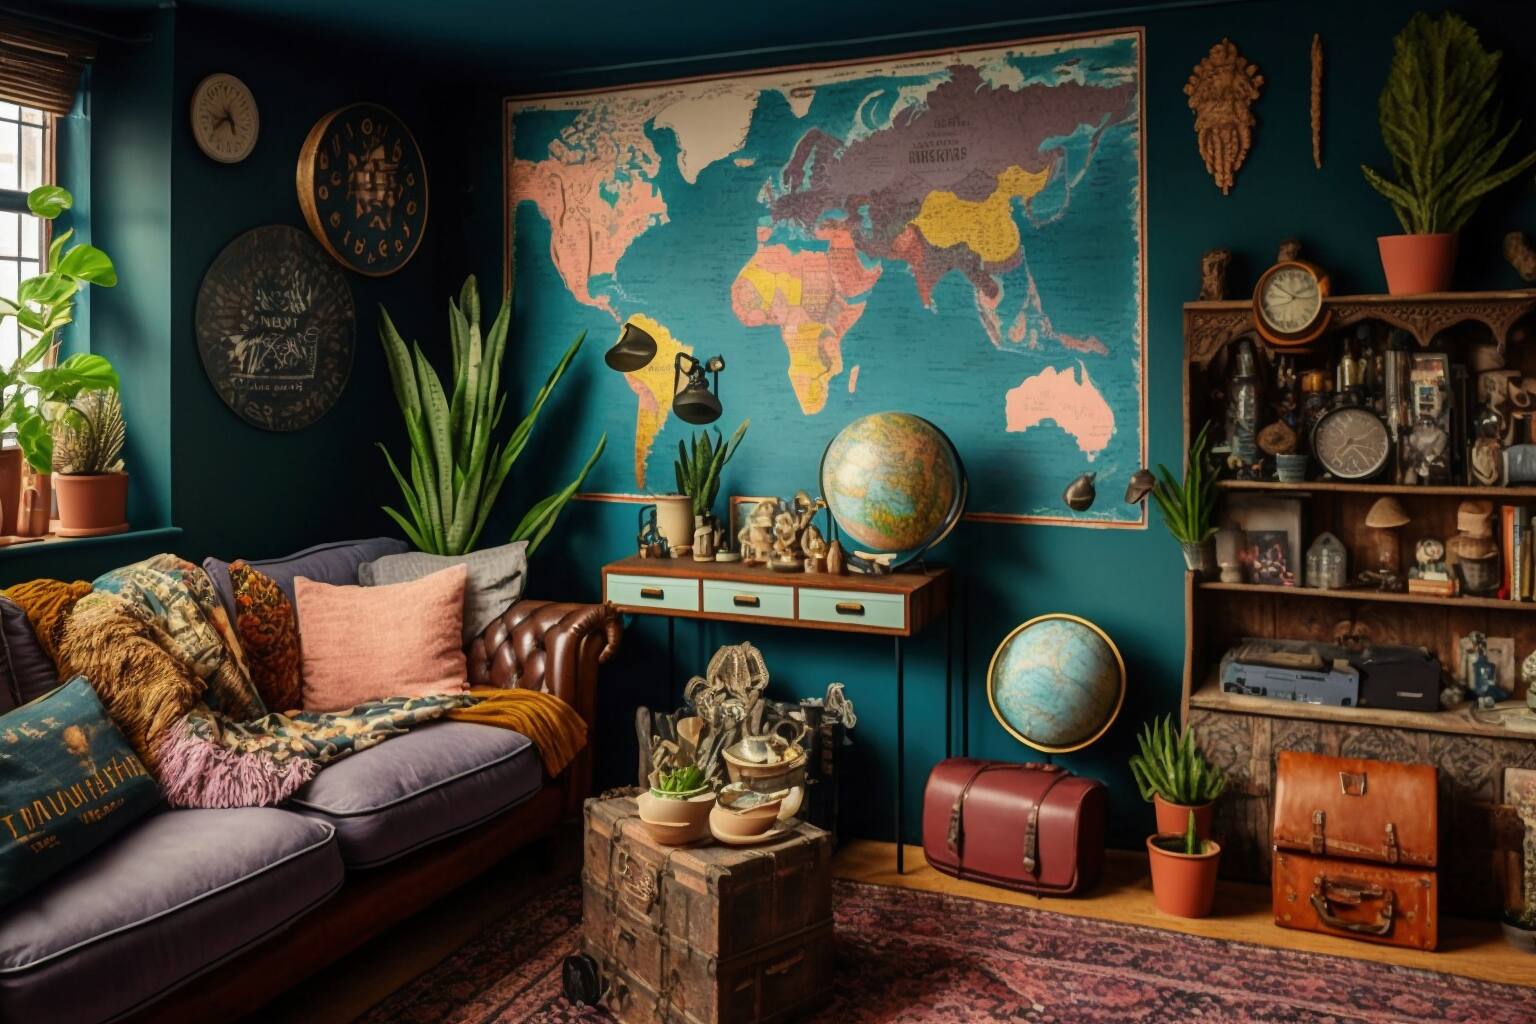 Maximalist Living Room With A Mix Of Contrasting Styles Unique Items Displayed